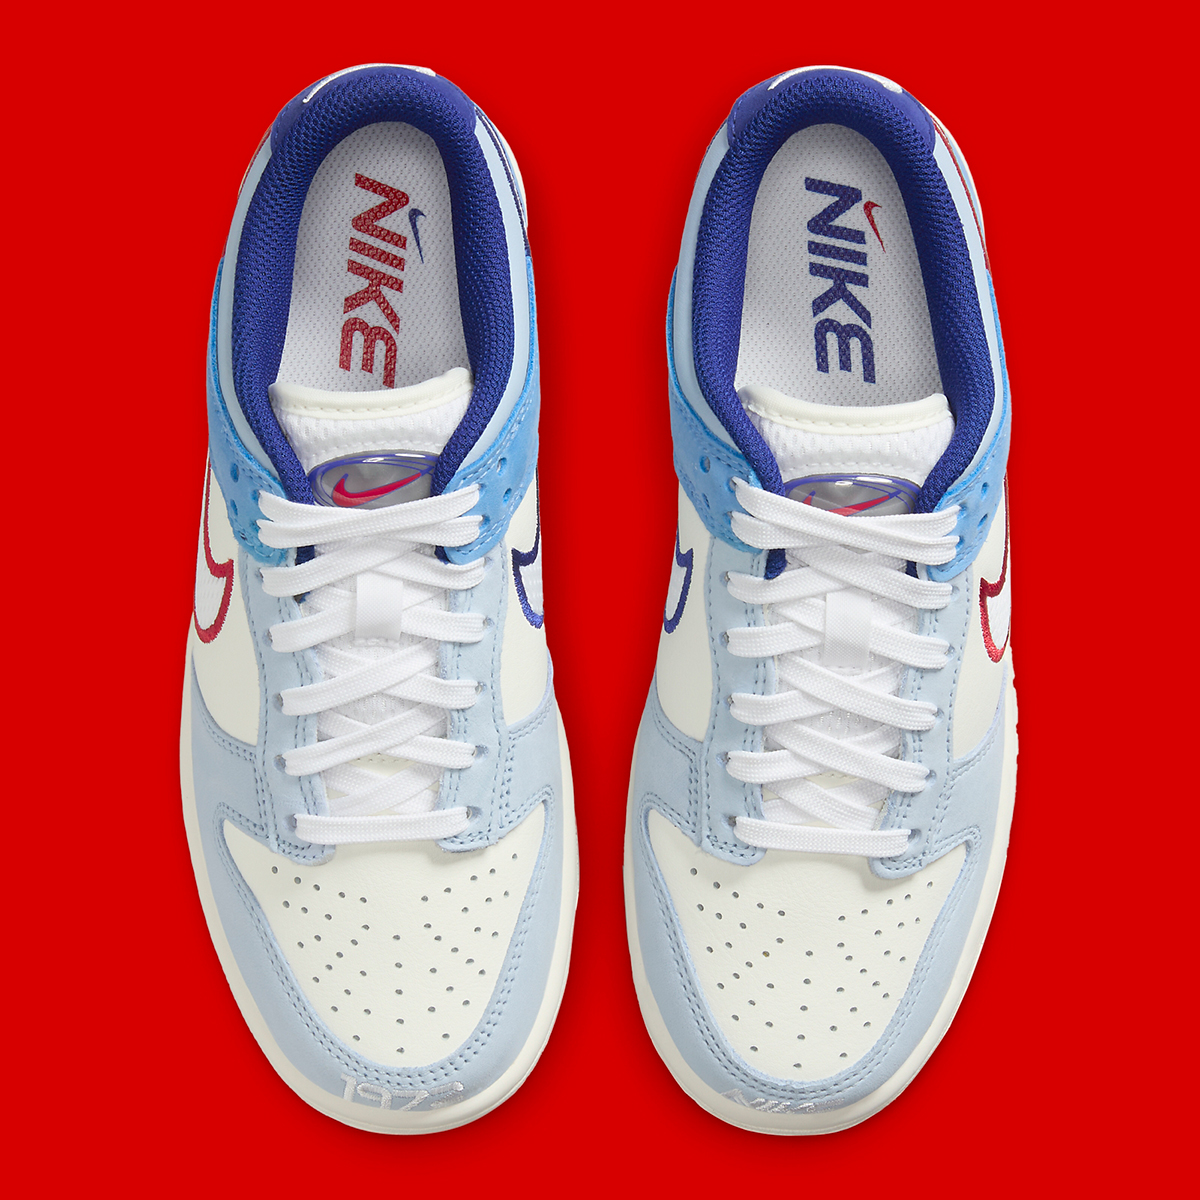 white patent leather nike revolution dunks sneakers for women Gs White Blue Red Mesh Hf5742 111 6